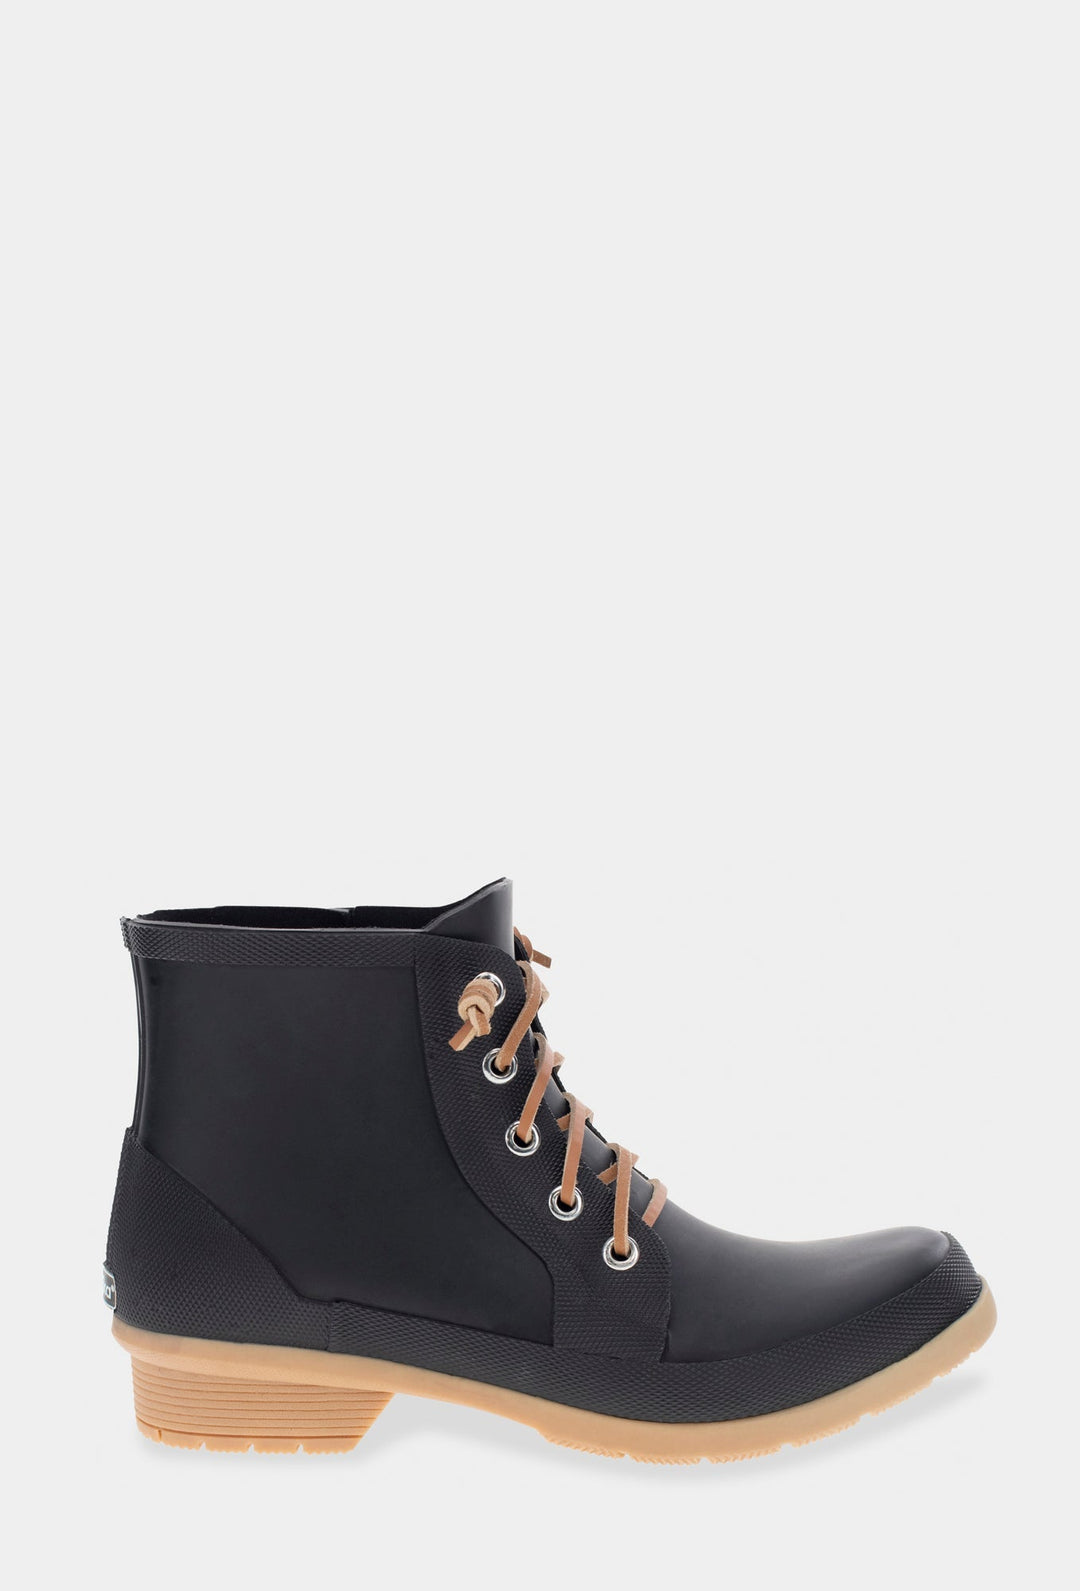 Lace Up Ankle Rain Boot - Black - Western Chief